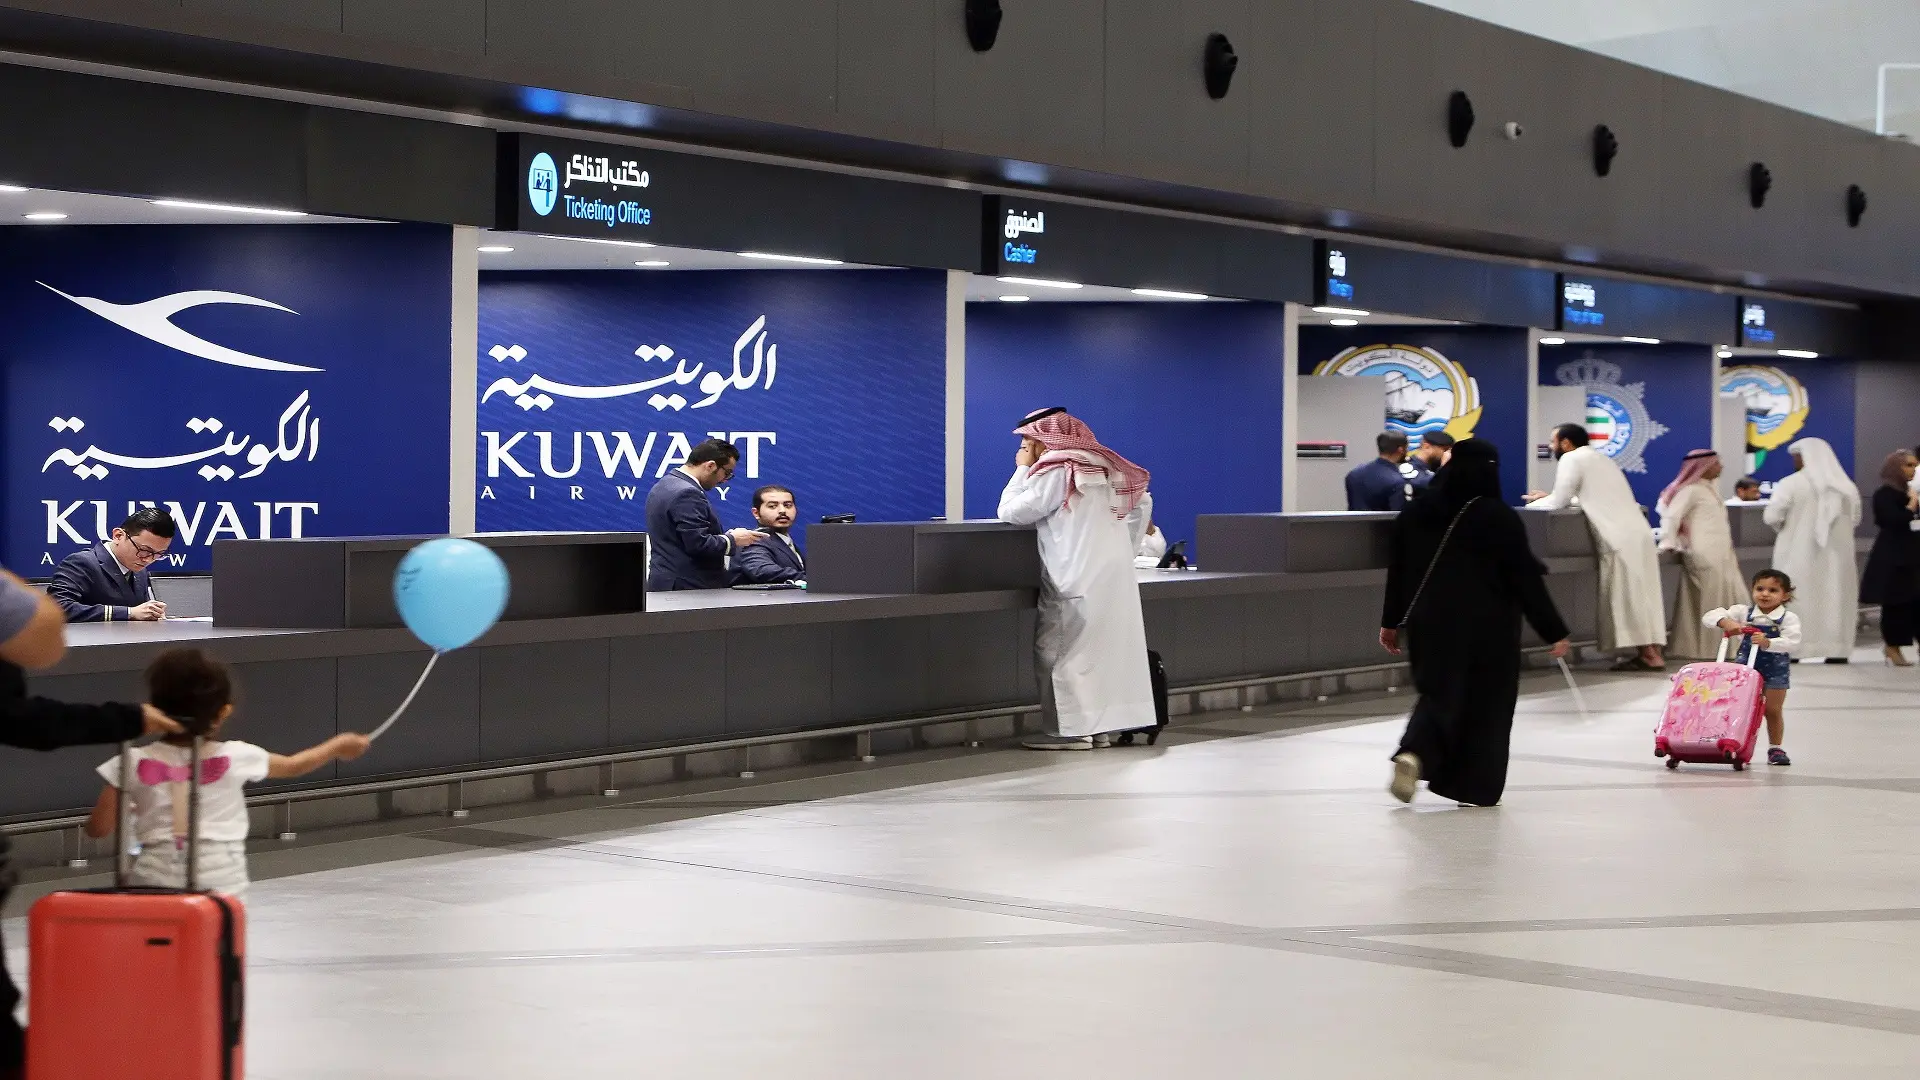 Airline review Airport experience - Kuwait Airways - 0